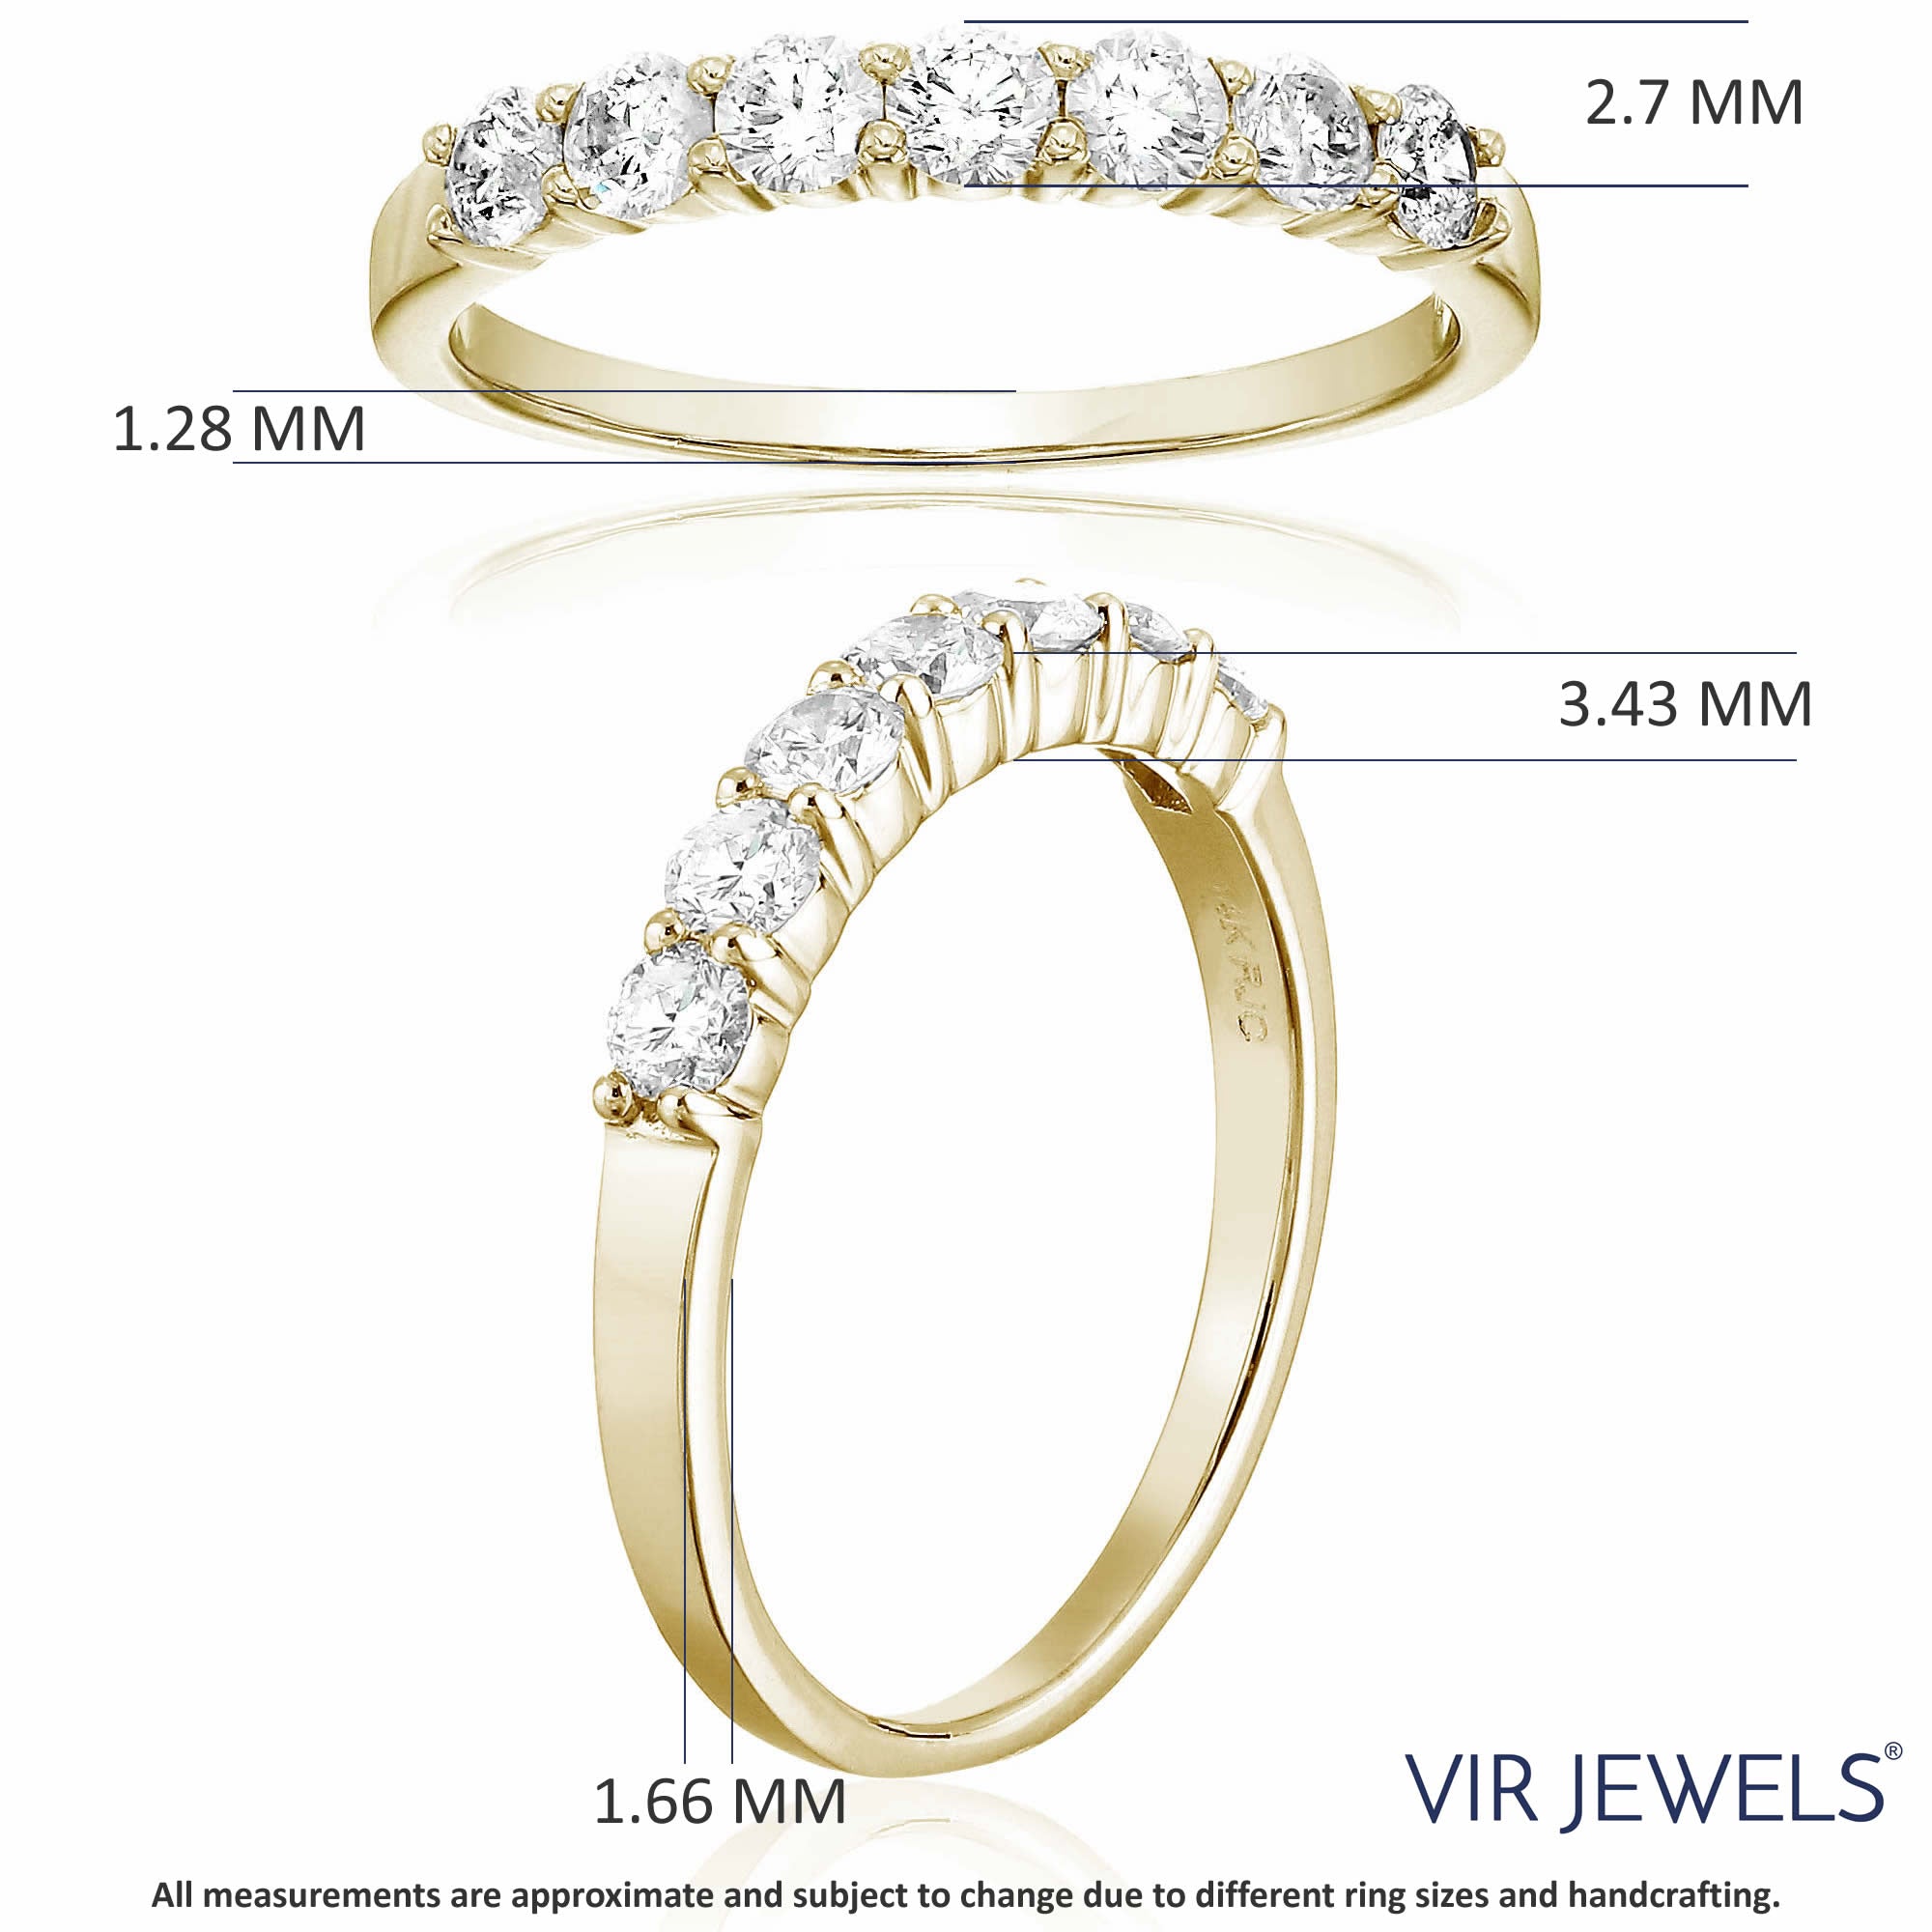 3/4 cttw Diamond Wedding Band for Women in 14K Yellow Gold 7 Stones Prong Set, Size 4.5-10